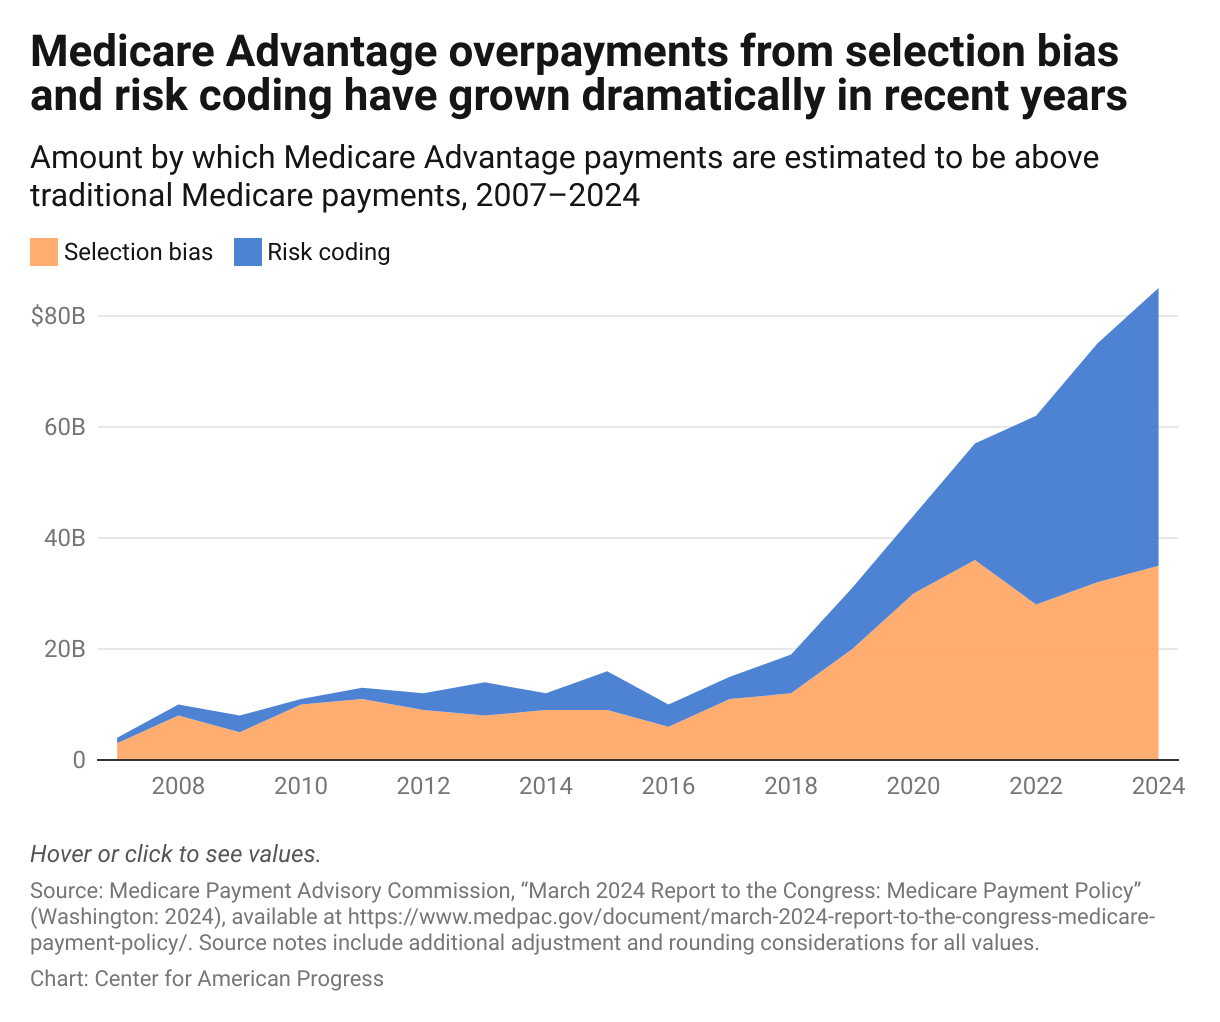 A stacked area chart showing the difference in cost between traditional Medicare and Medicare Advantage plans due to selection bias and risk coding in Medicare Advantage plans, demonstrating that overpayments per year have increased since 2007 and particularly dramatically since 2018.